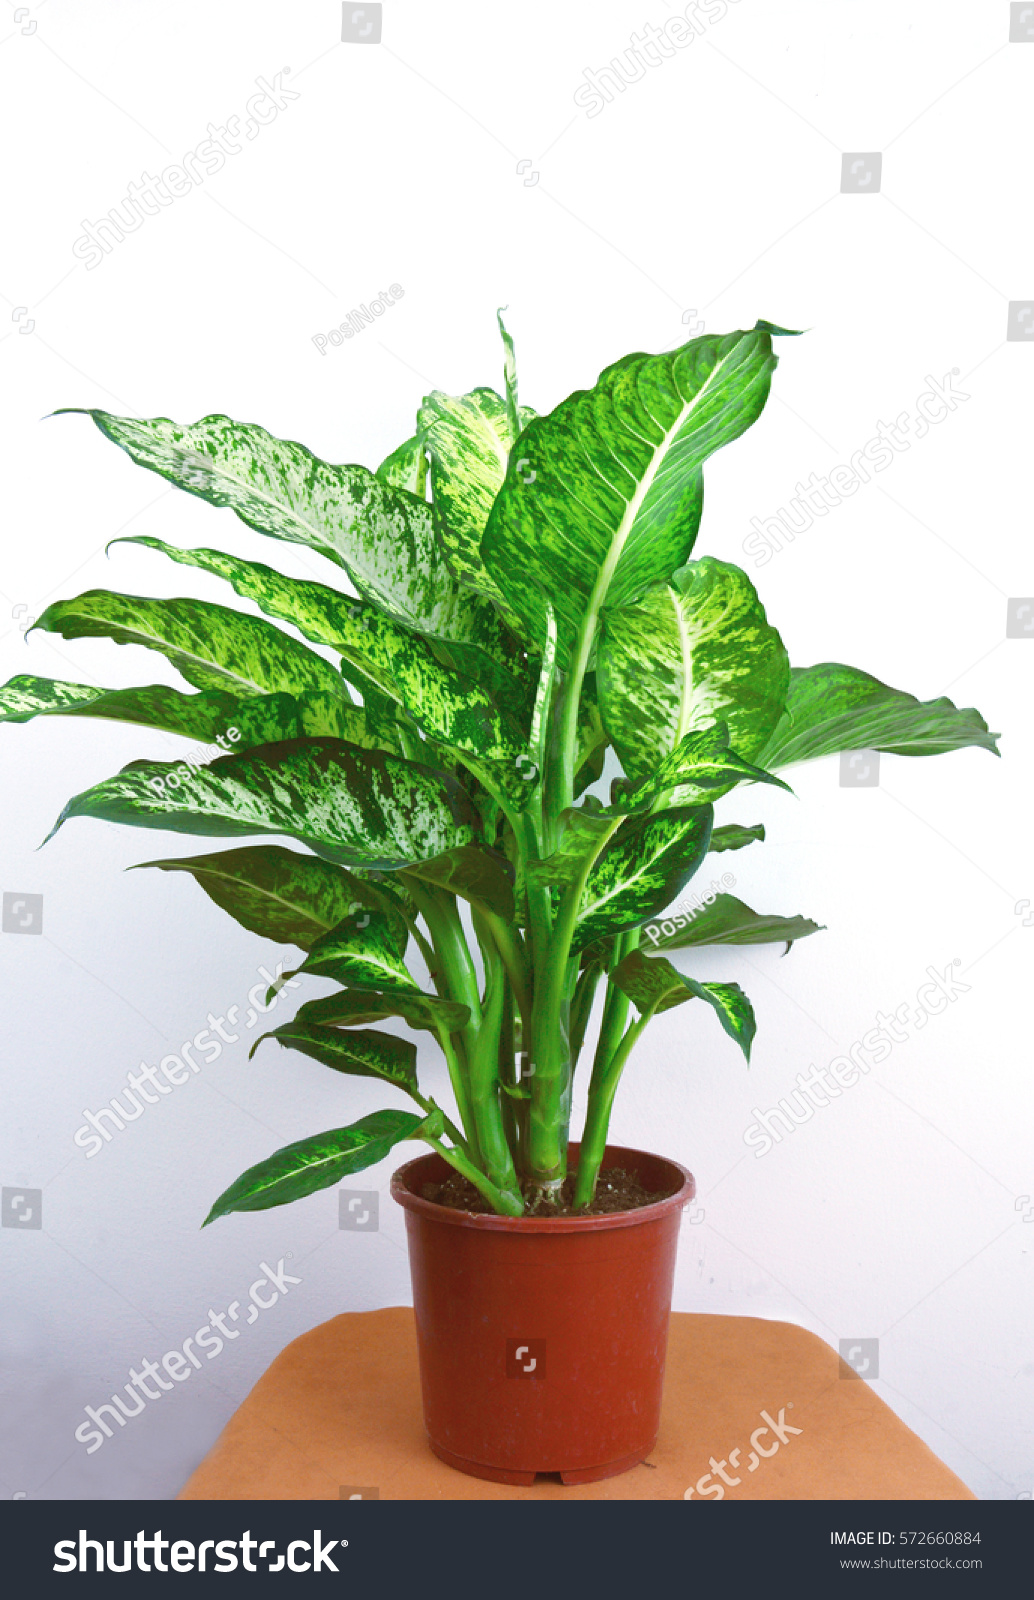 Stock Photo Chinese Evergreen Is Houseplants For Improving Indoor Air Quality Chinese Evergreen In Pot With 572660884 